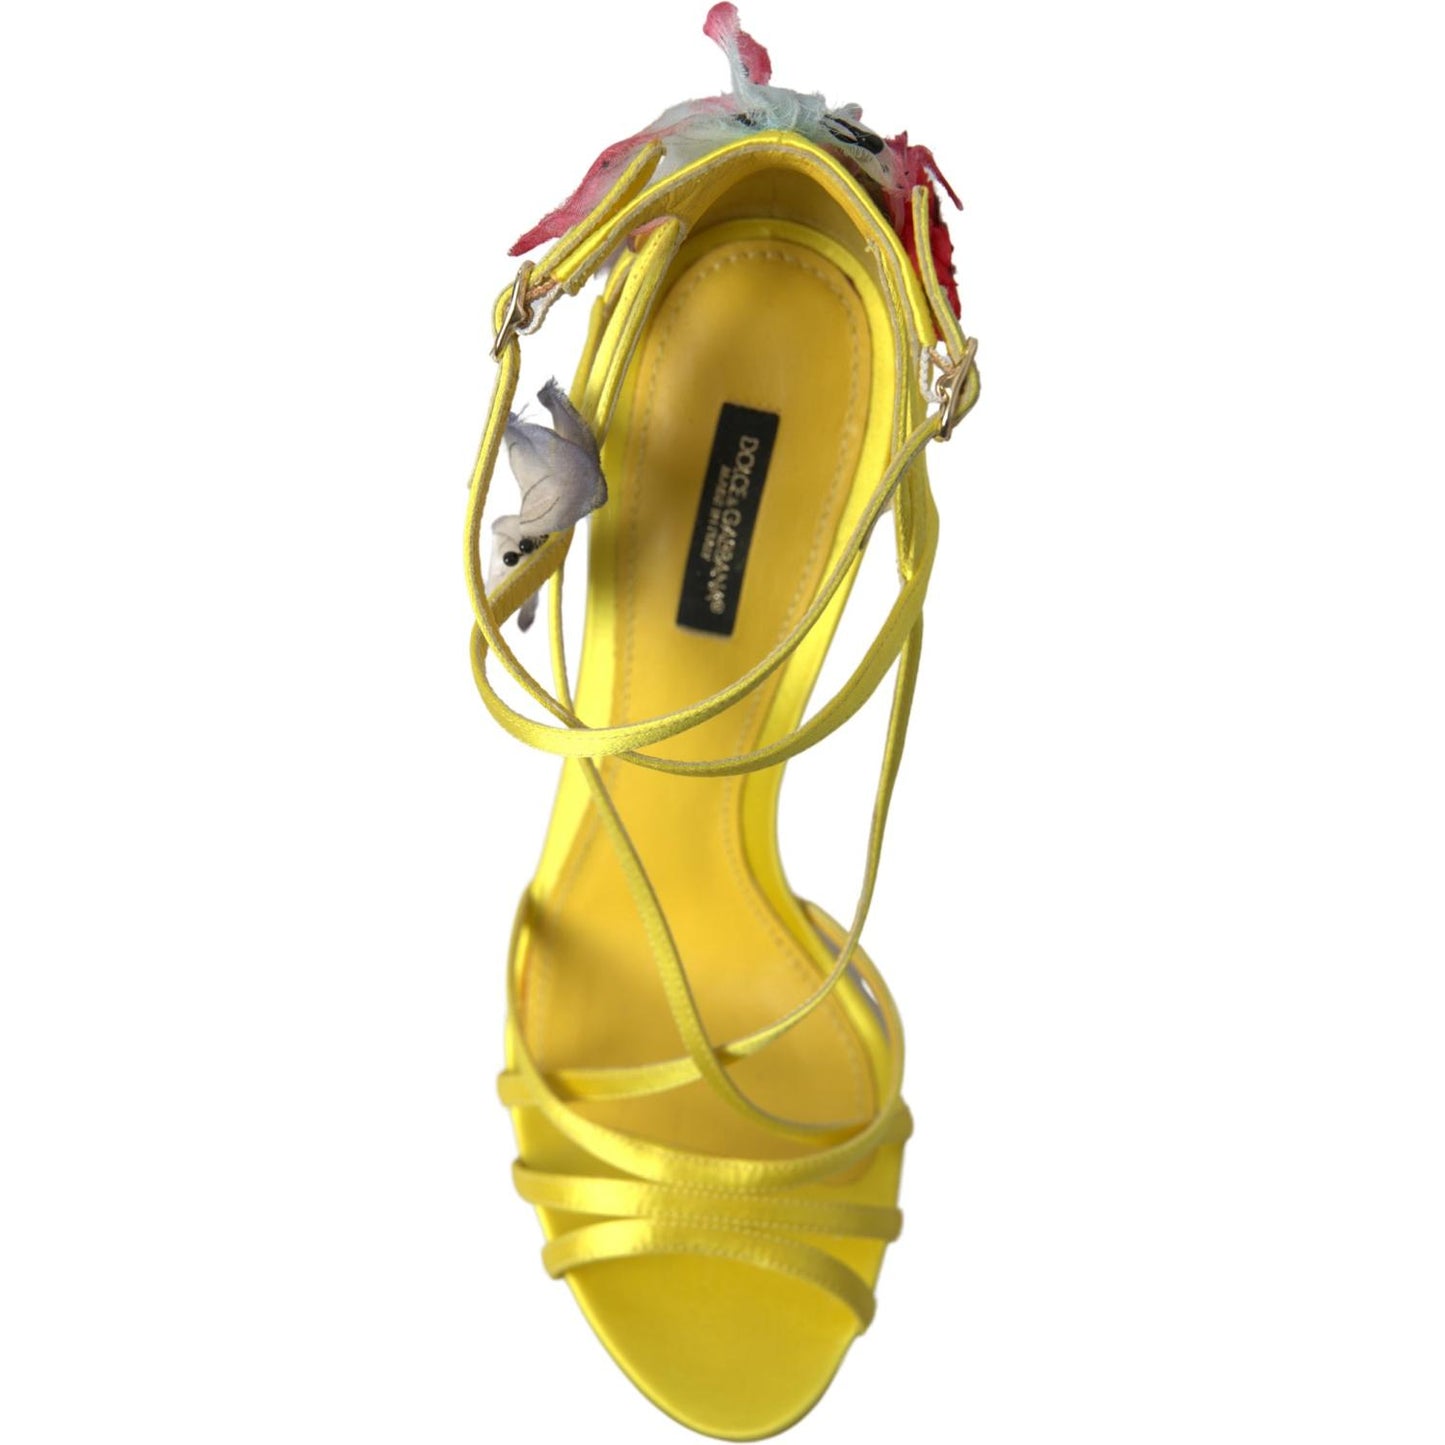 Dolce & Gabbana Enchanting Yellow Ankle Strap Sandals yellow-keira-butterfly-appliques-sandals 465A8942-Large-98de9707-79e.jpg